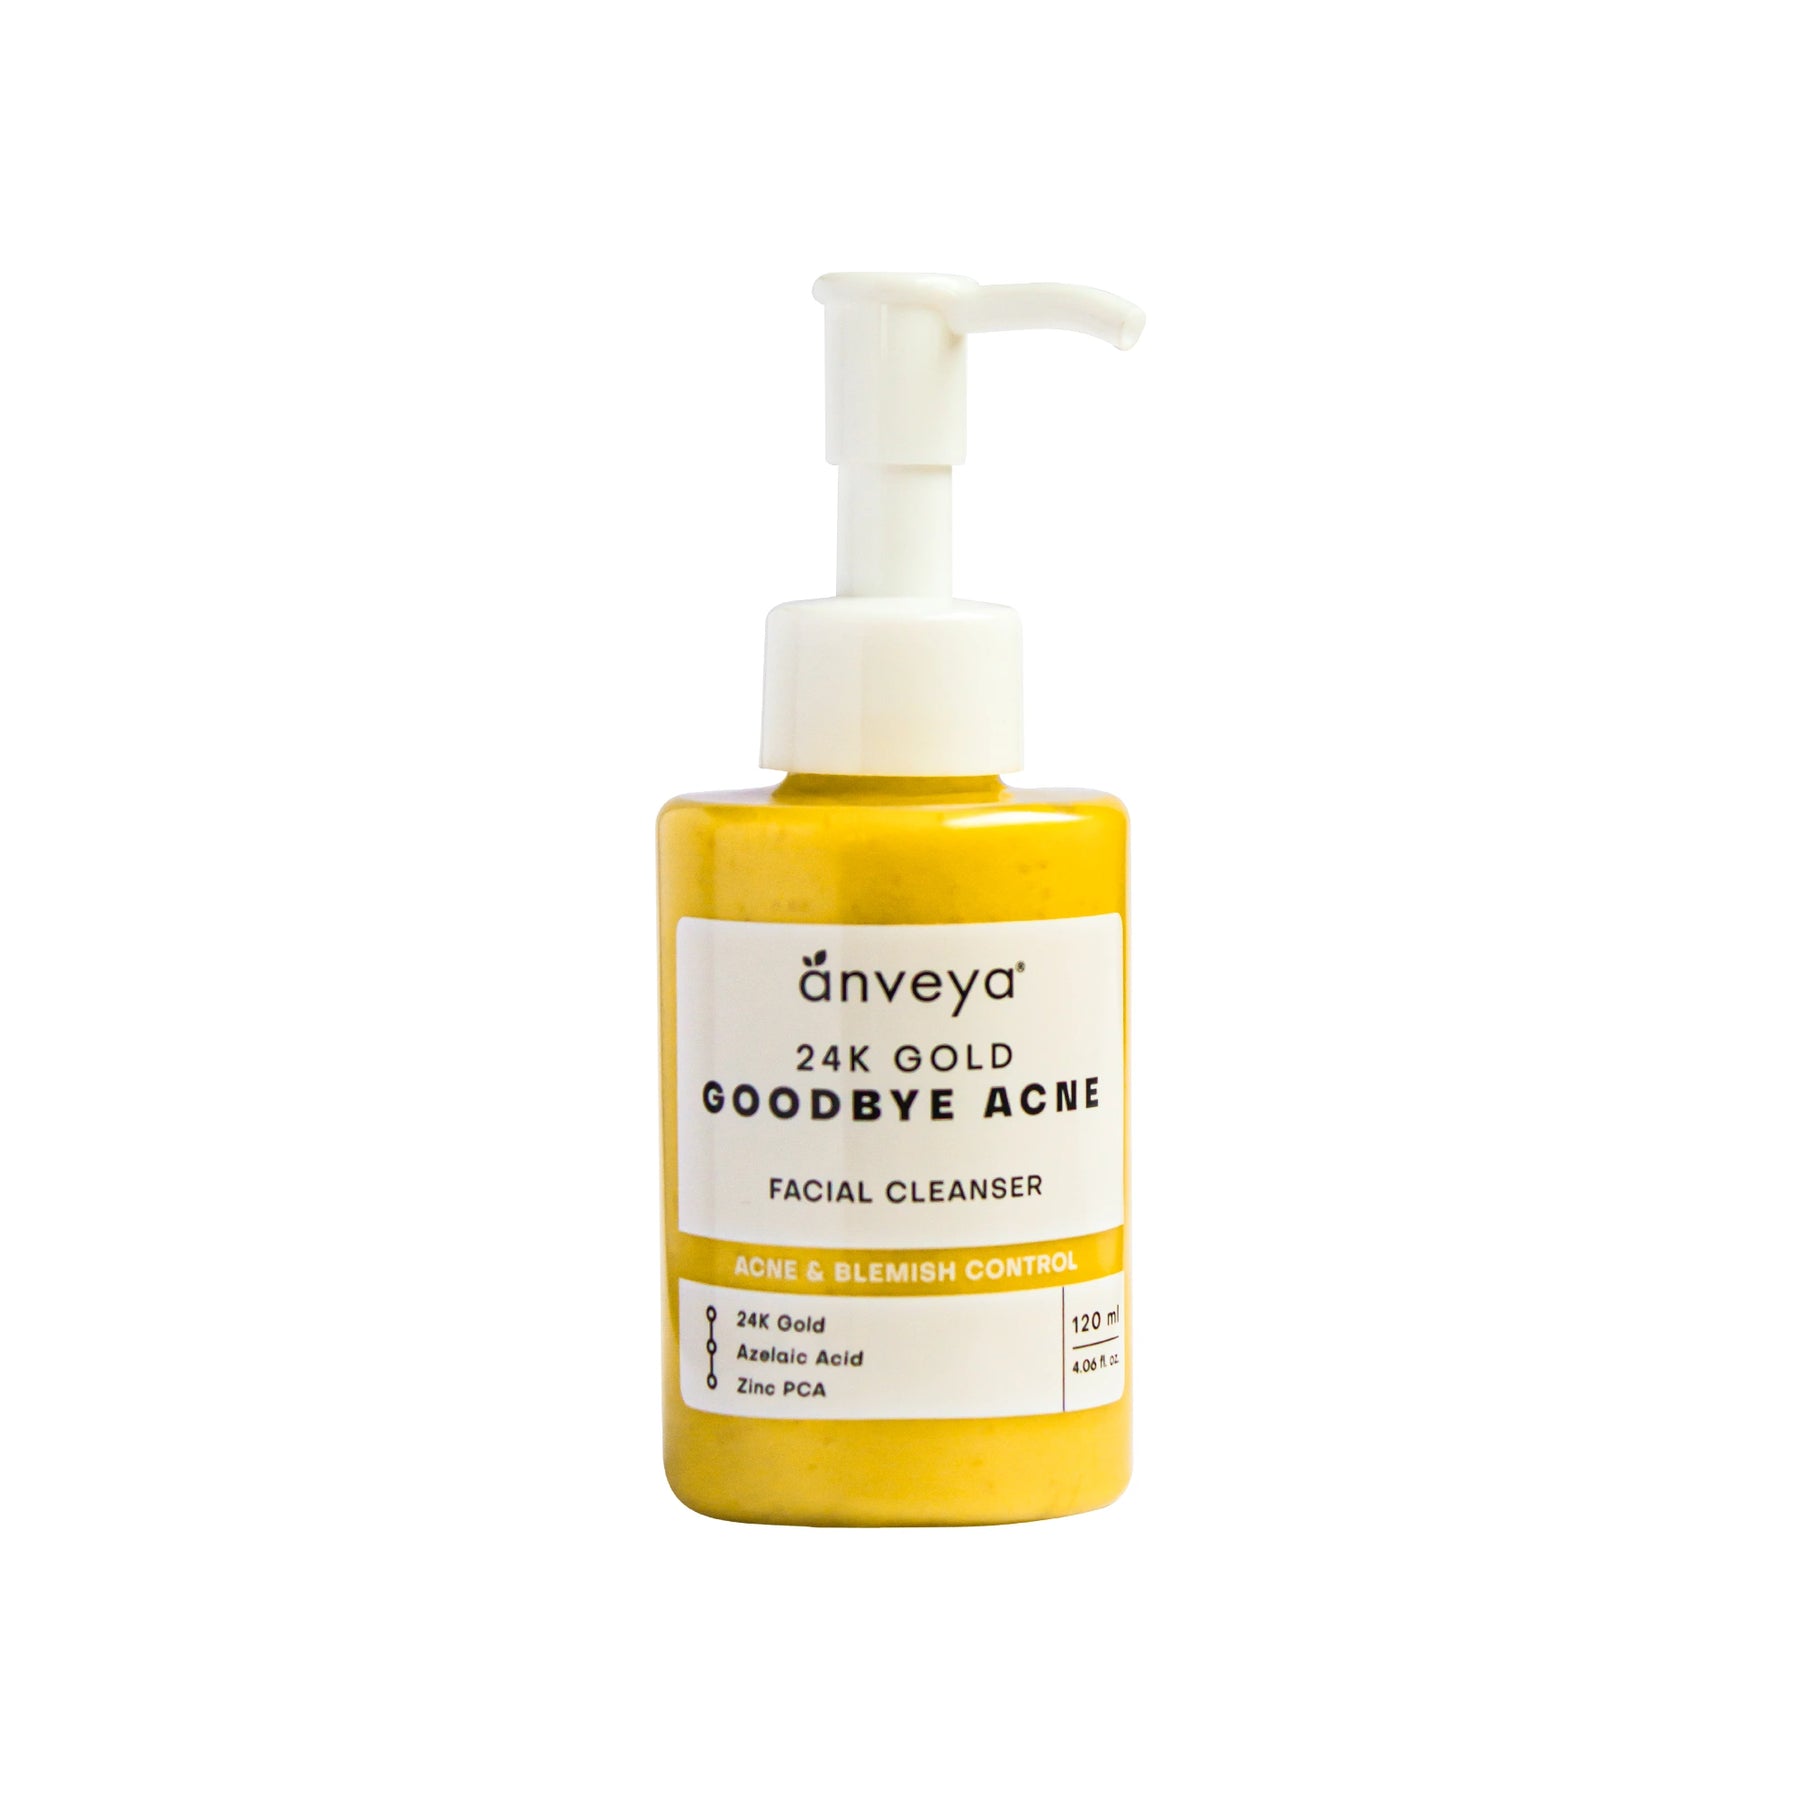 Anveya Goodbye Acne Cleanser (Face Wash), 120ml For All Skin Types | Remove Acne Scars, Pimple Marks & Pore Tightening